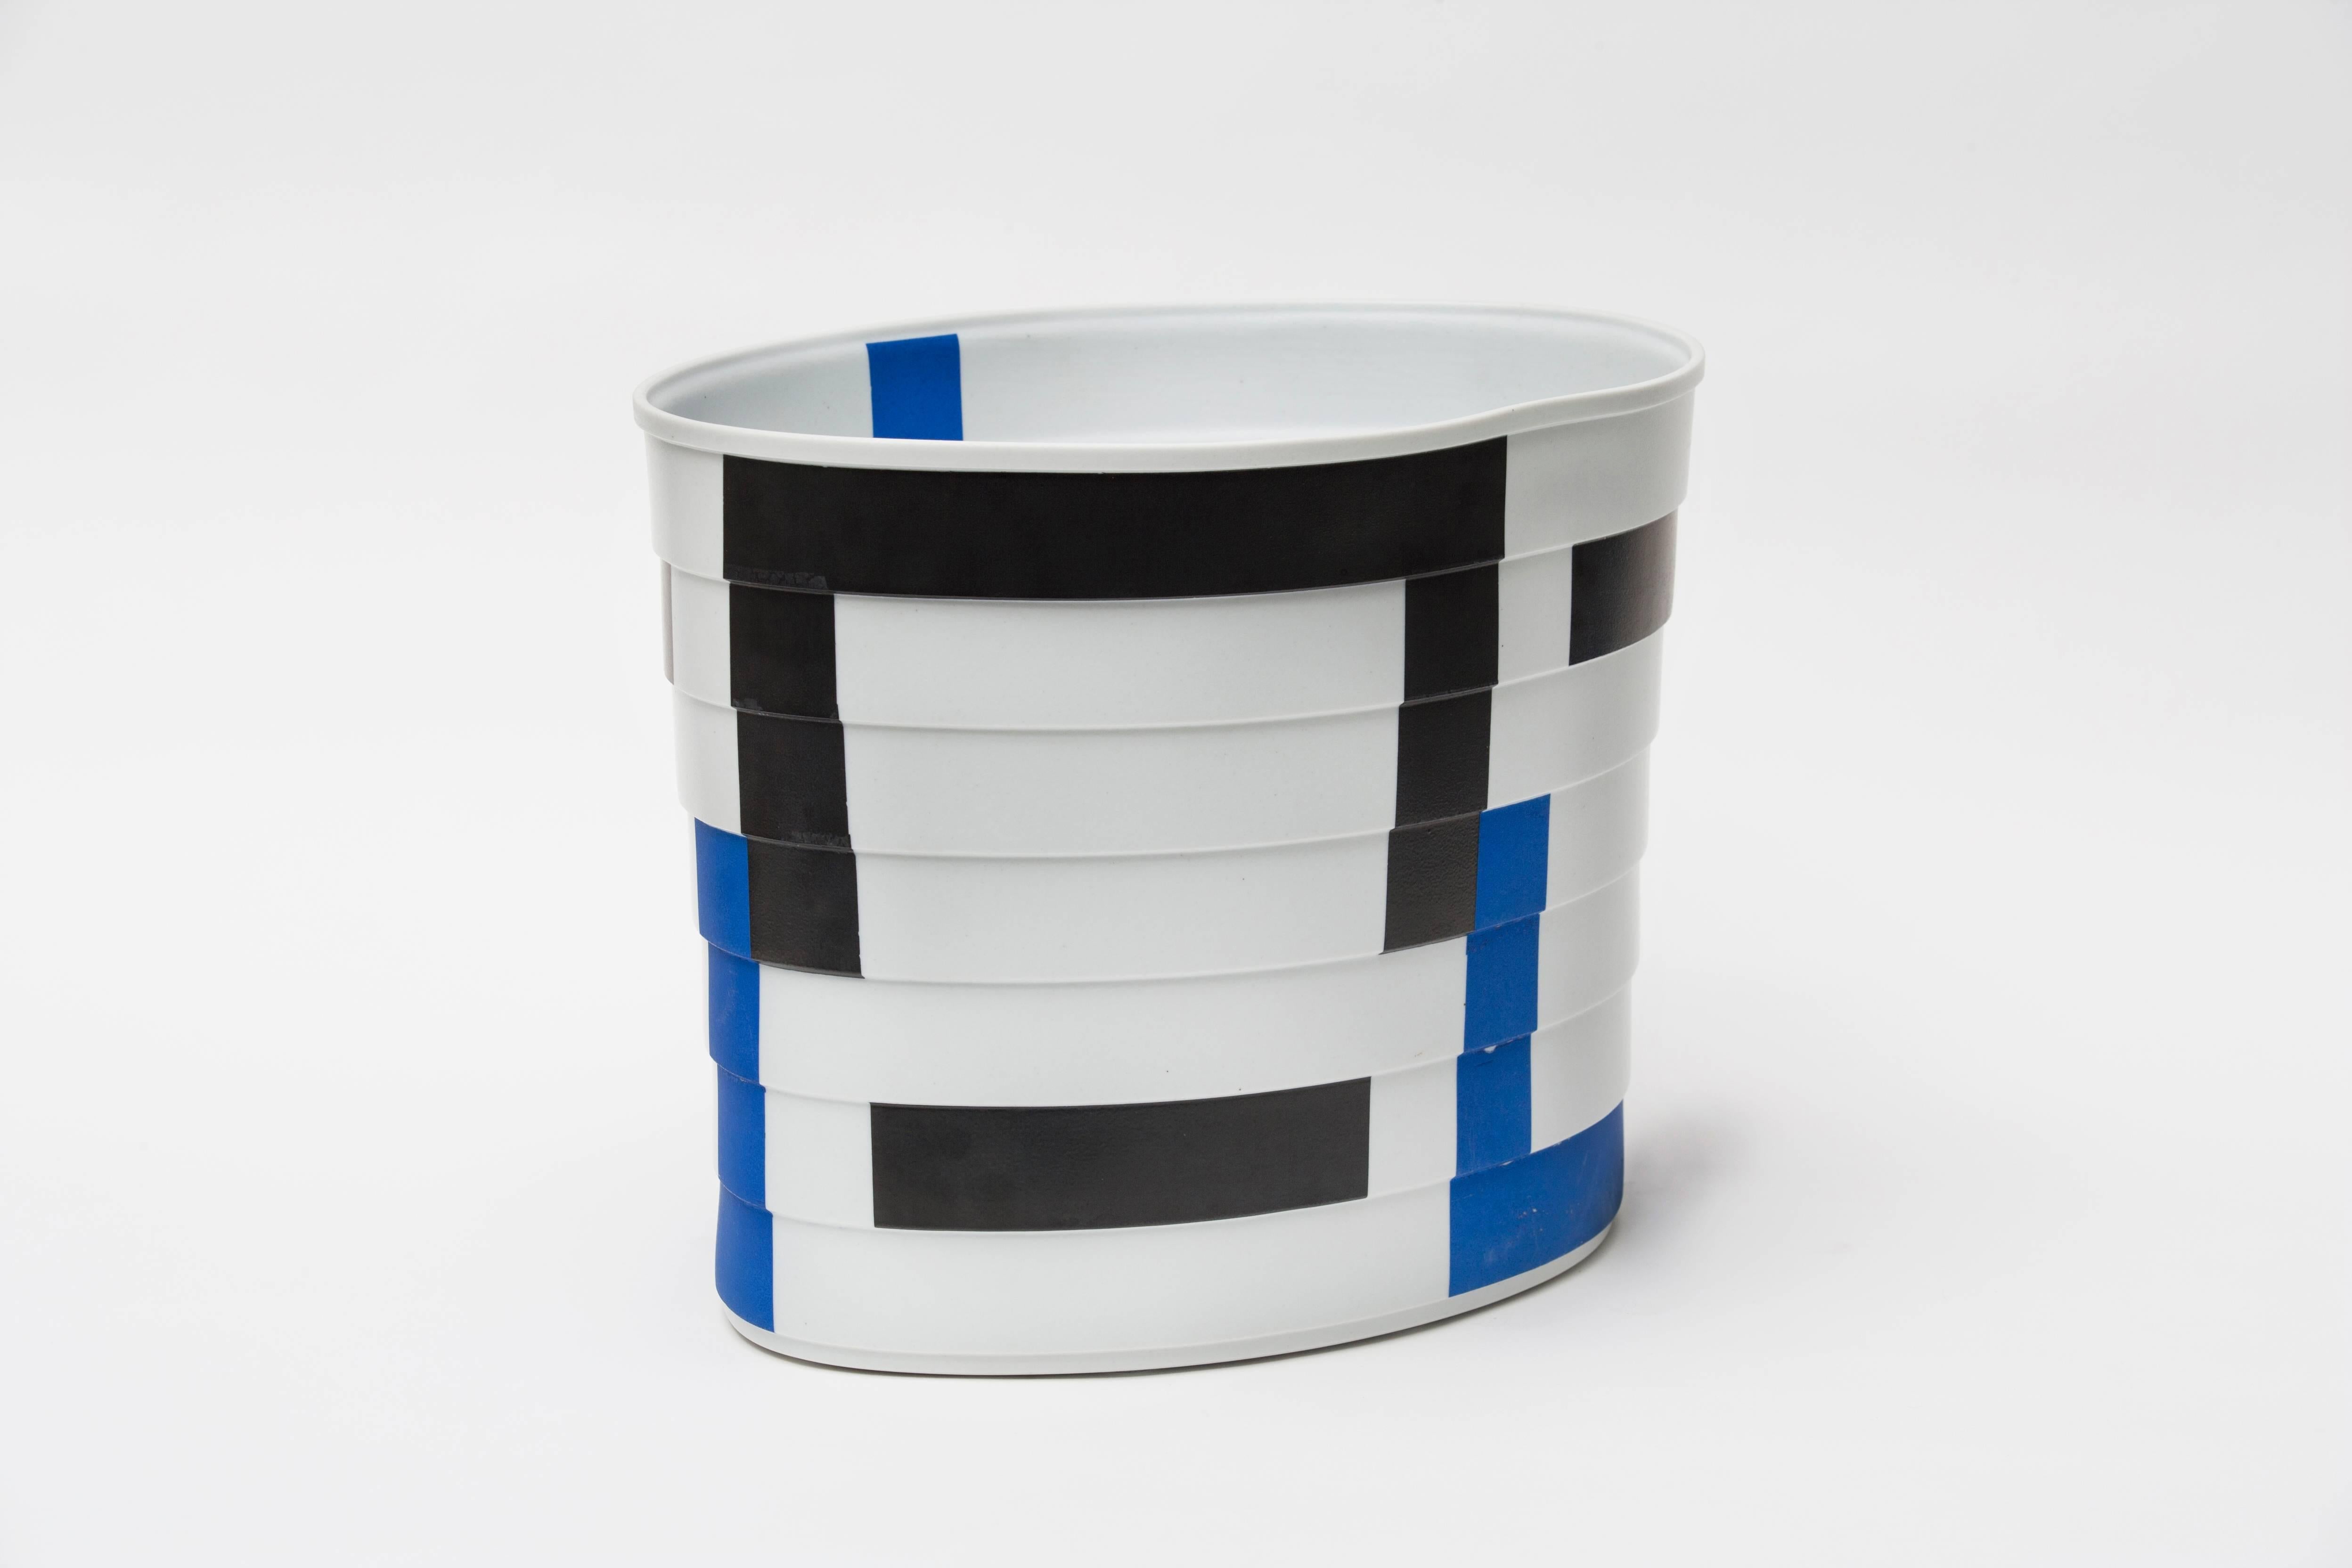 Bodil Manz stepped porcelain vessel in blue and black, 13 in., made in Denmark 1